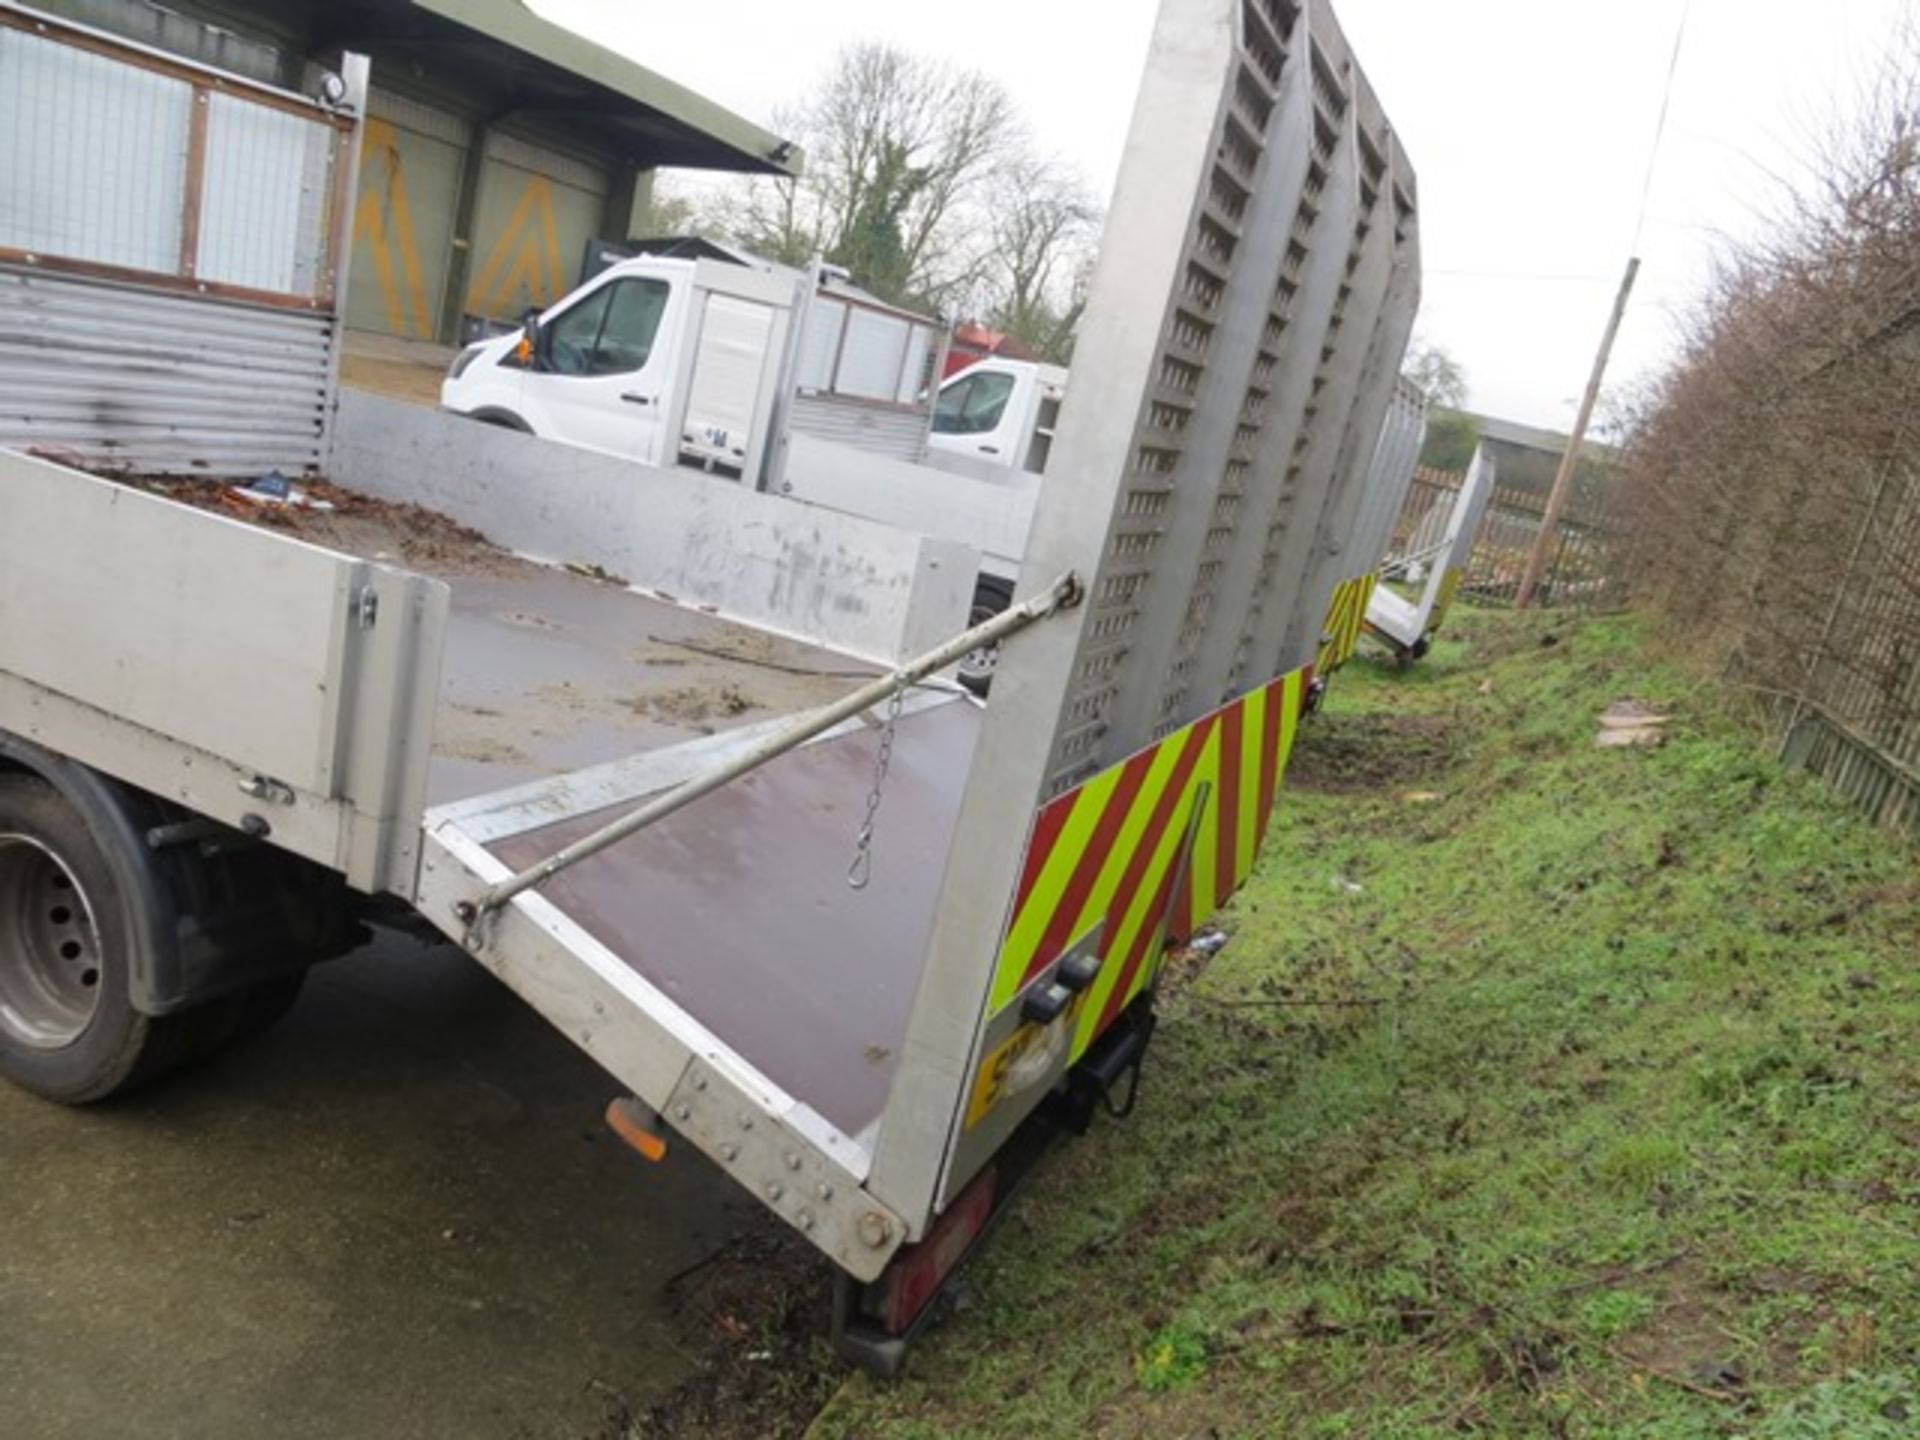 Ford Transit 350 L3 RWD diesel drop side twin wheel lorry with beaver tail. Registration Number SN17 - Image 6 of 10